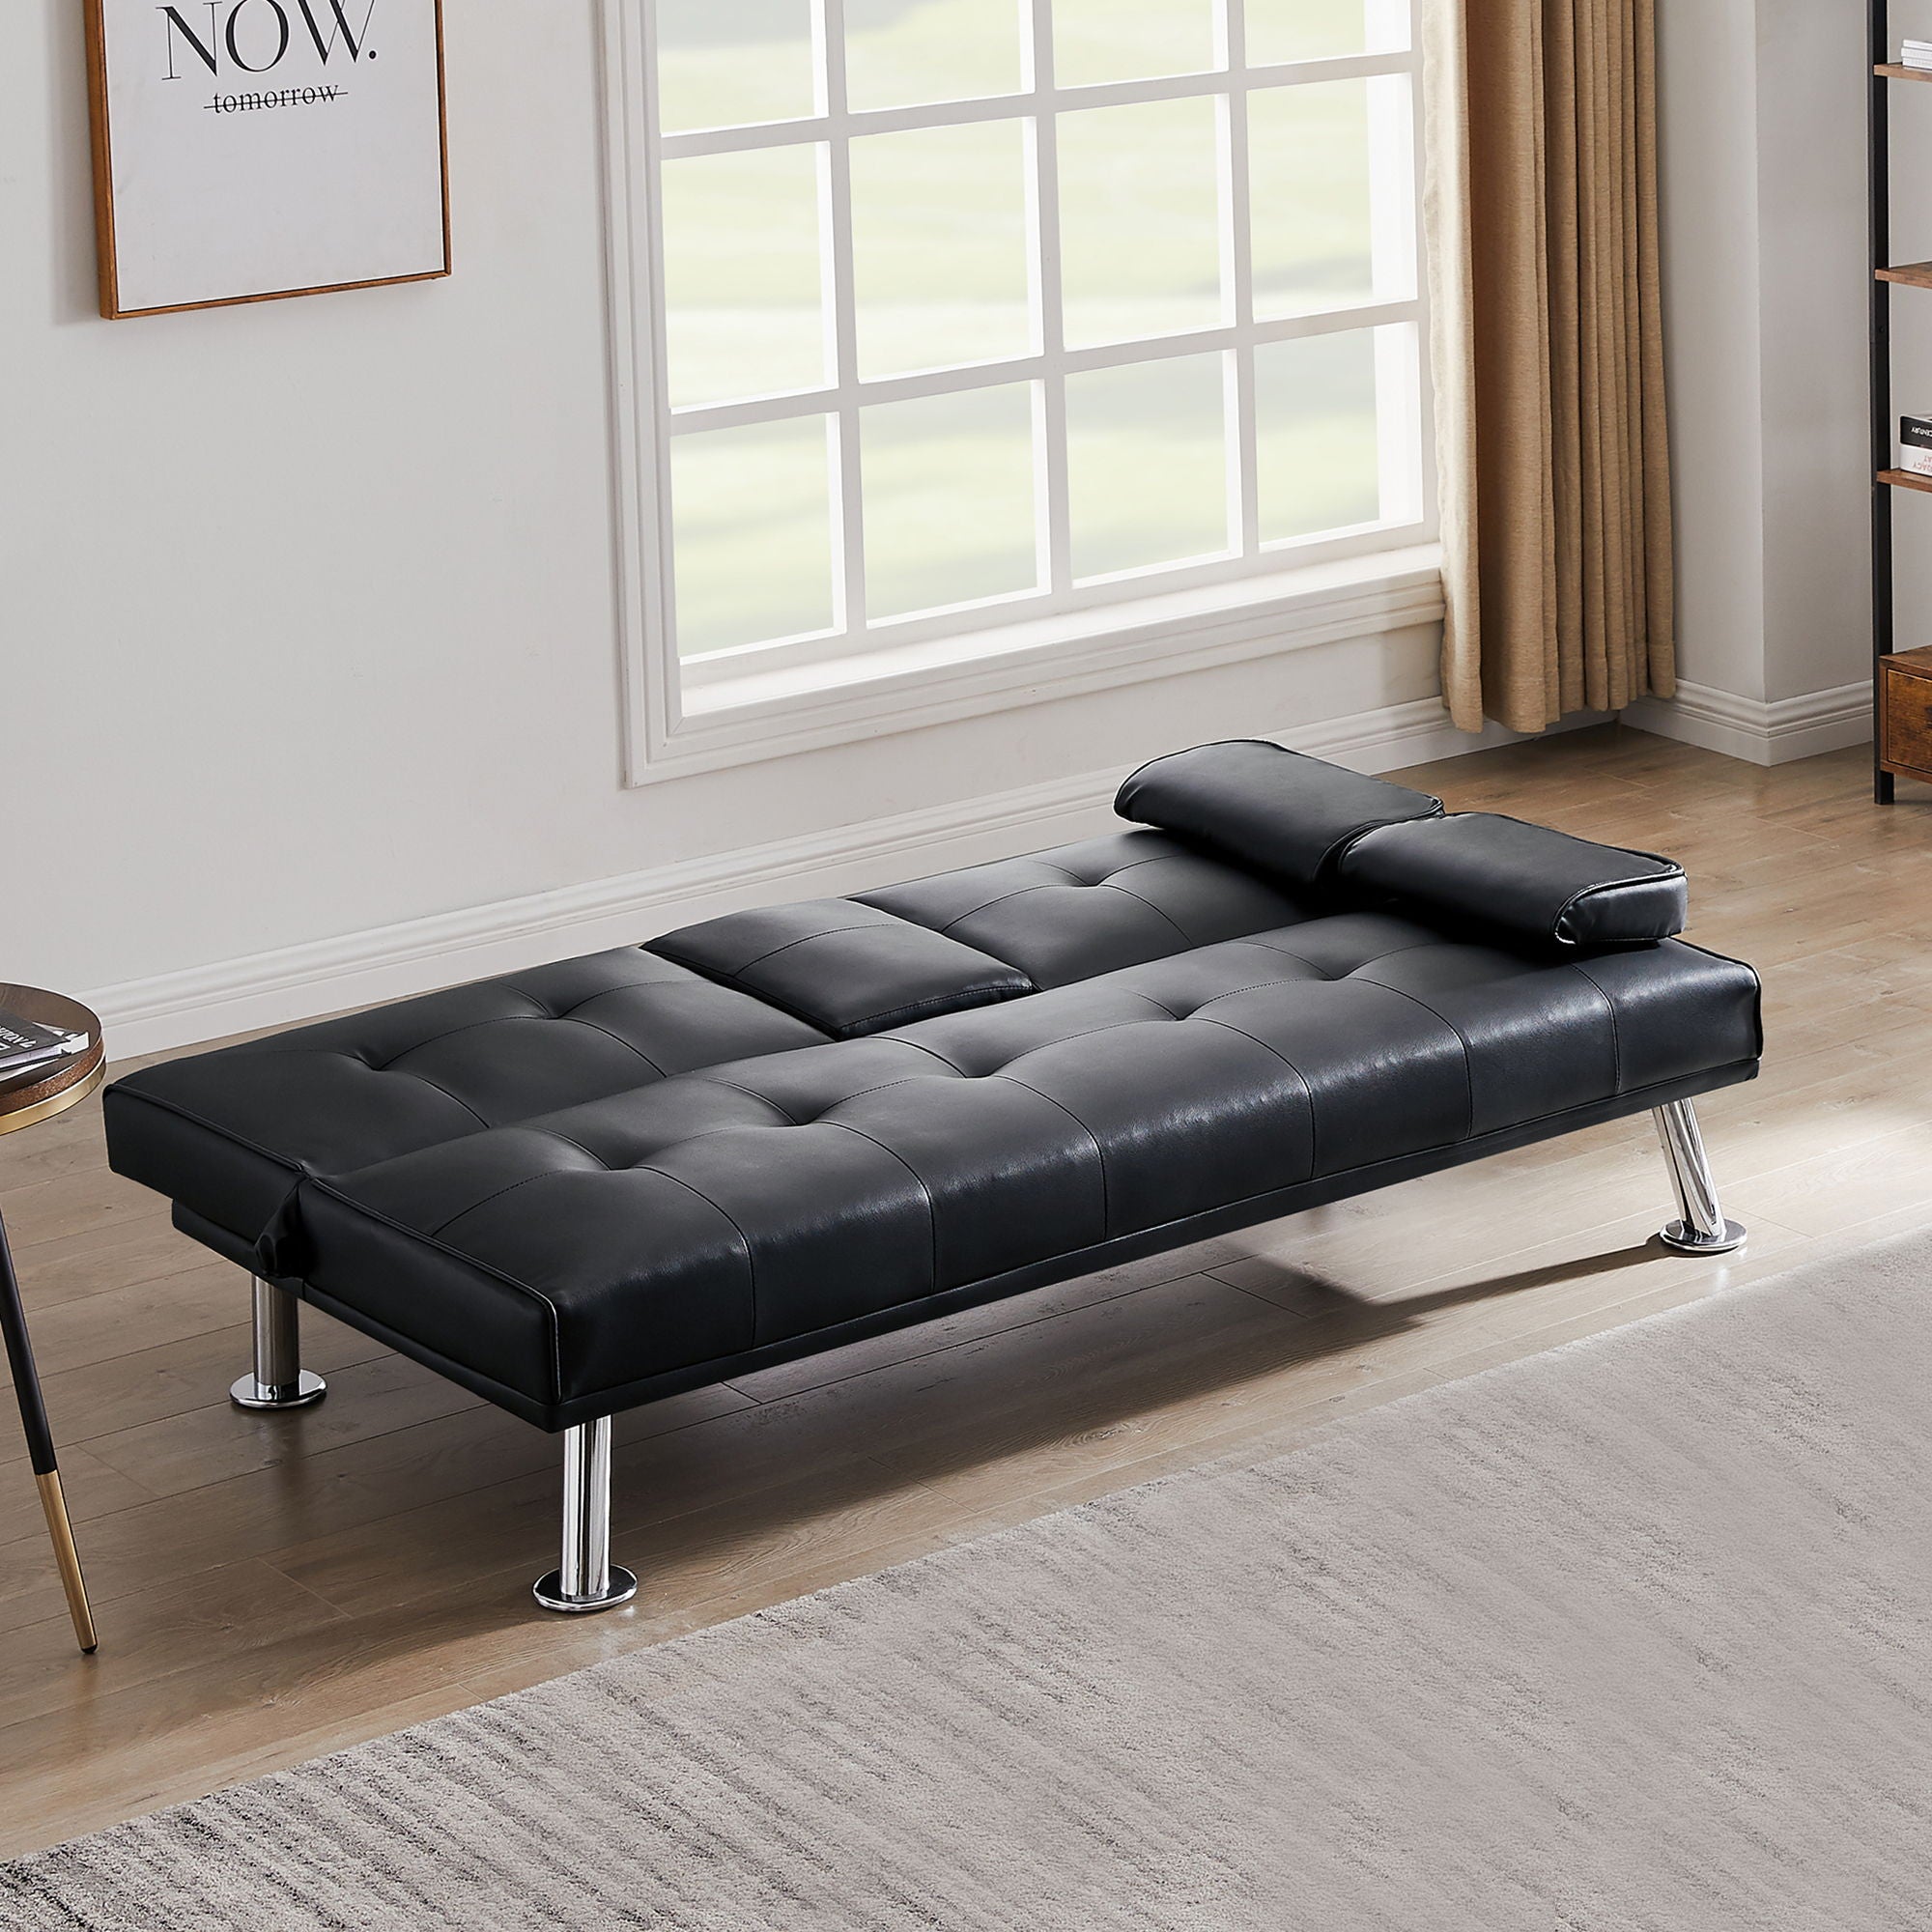 Modern Faux Leather Loveseat Sofa Bed With Cup Holders, Convertible Folding Sleeper Couch Bed .